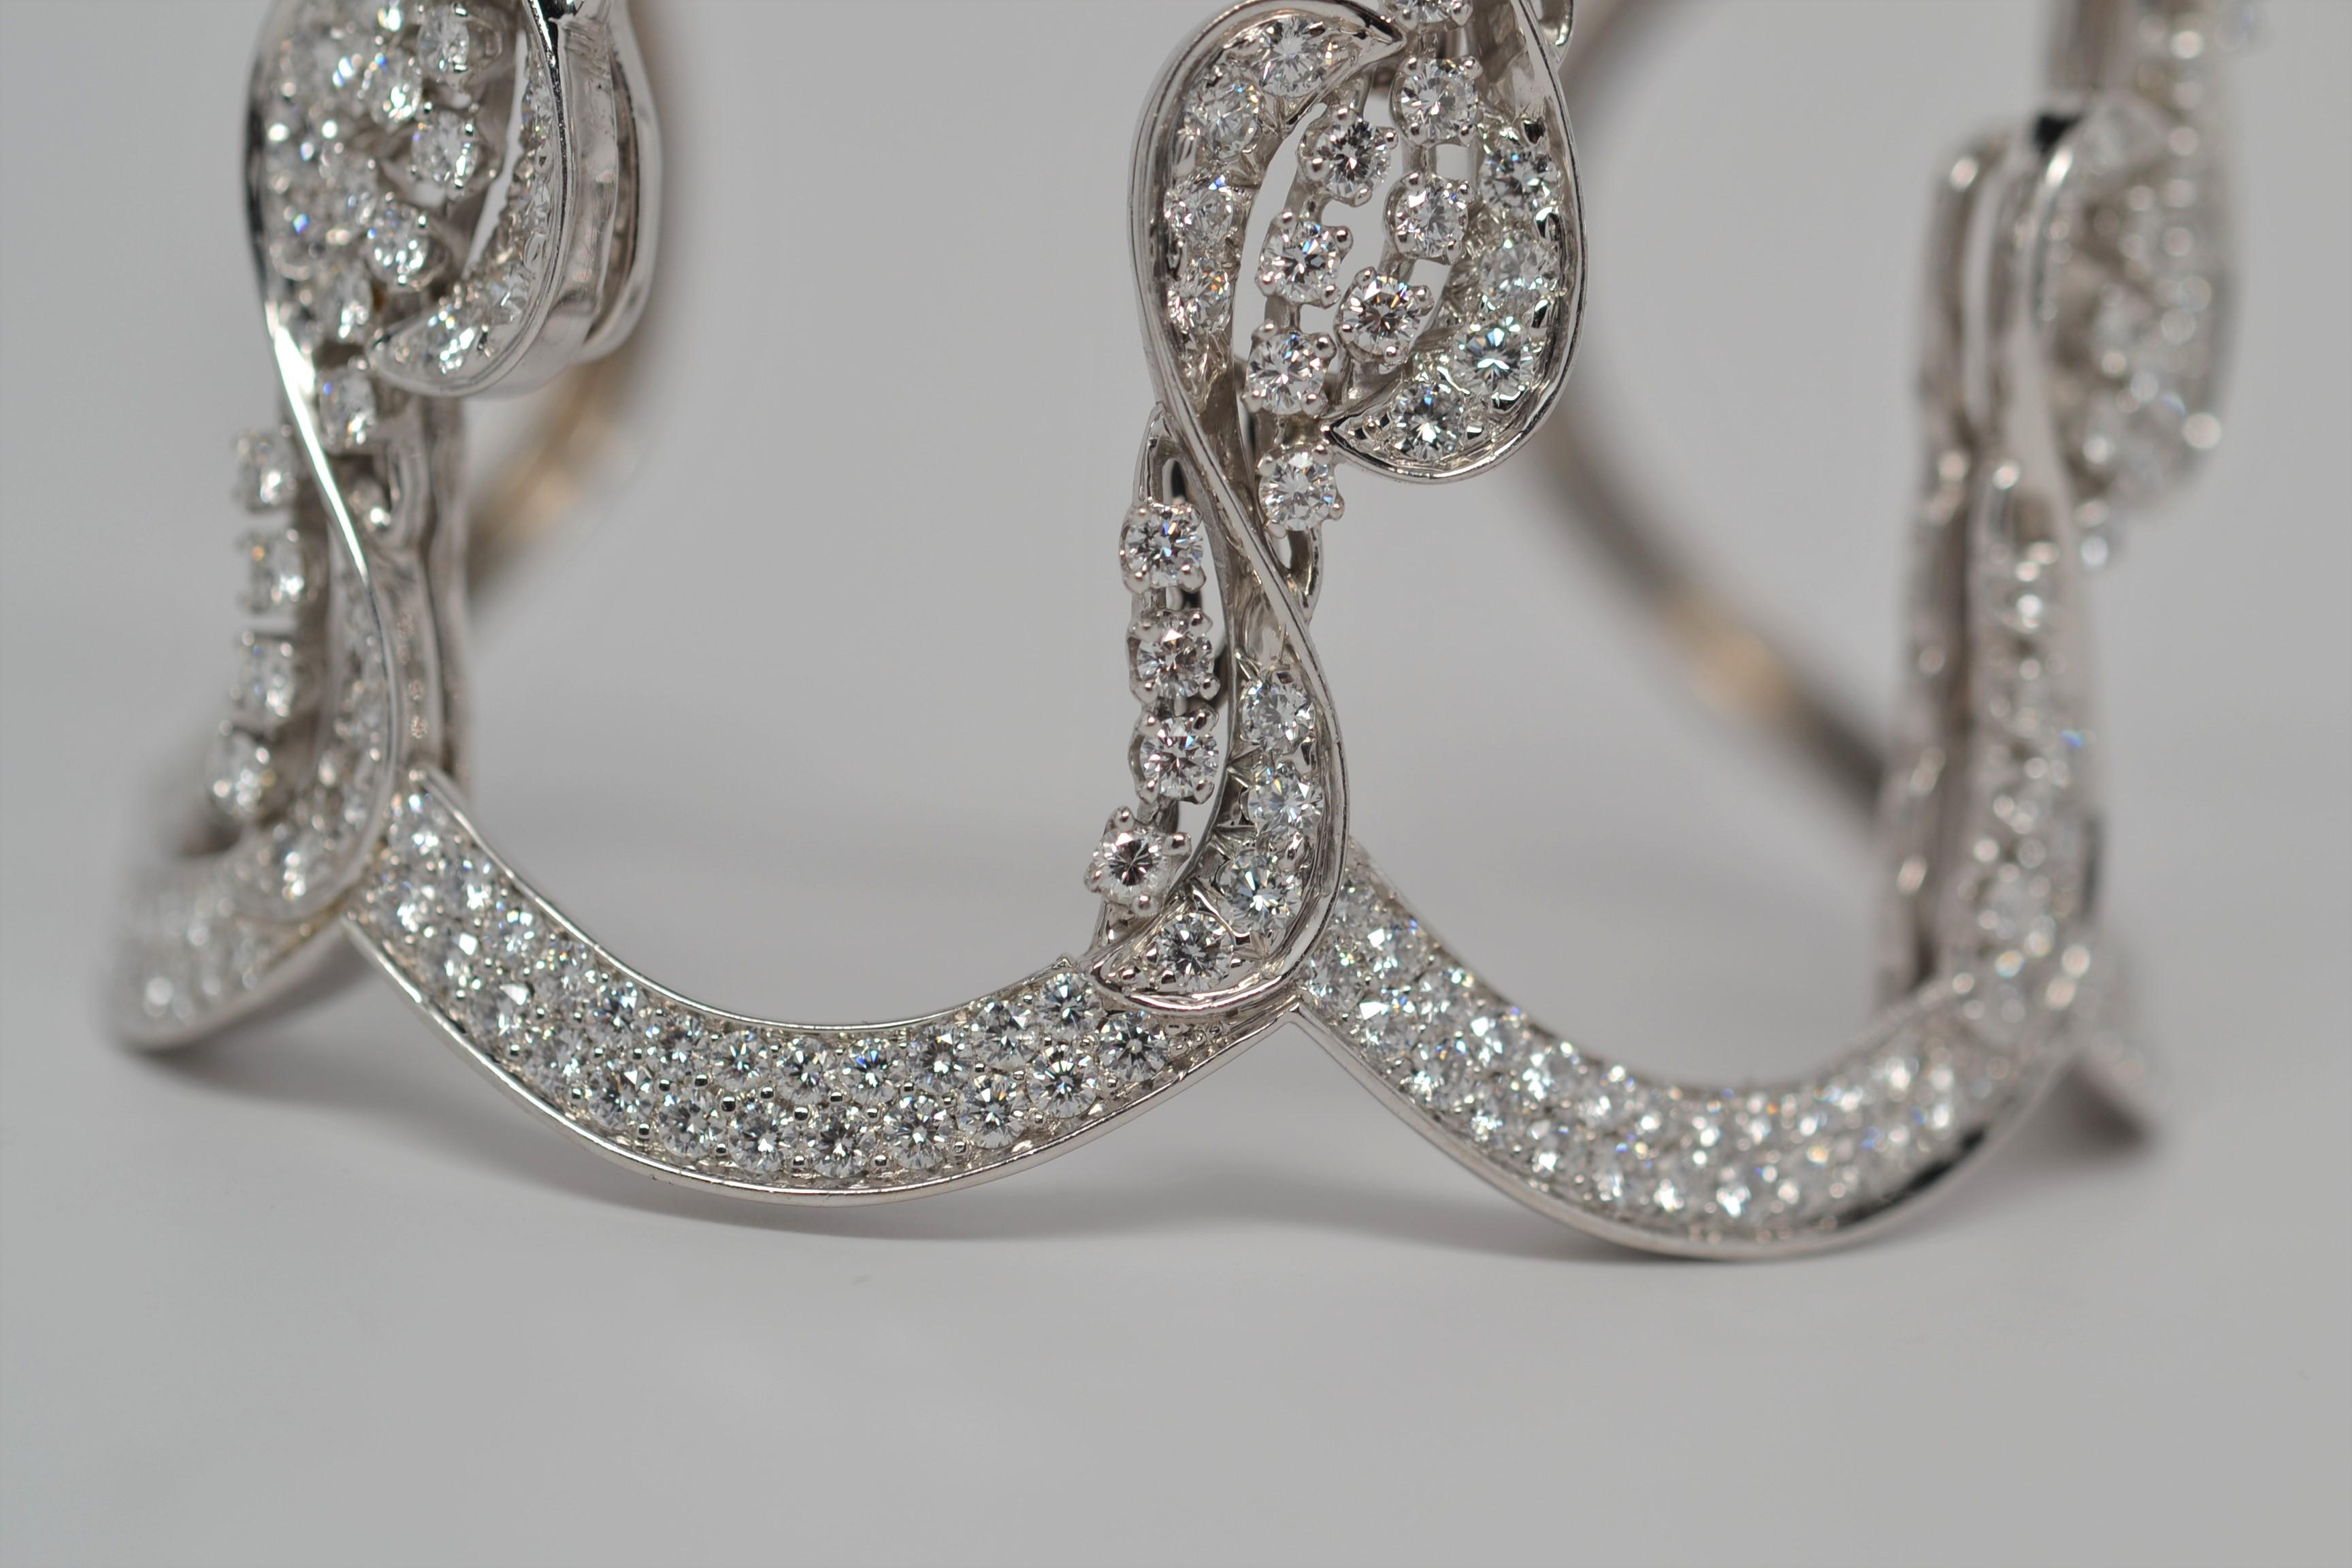 18k White Gold Hinged Cuff Bracelet with Round Cut Diamonds, 8.72 Carats In New Condition For Sale In New York, NY